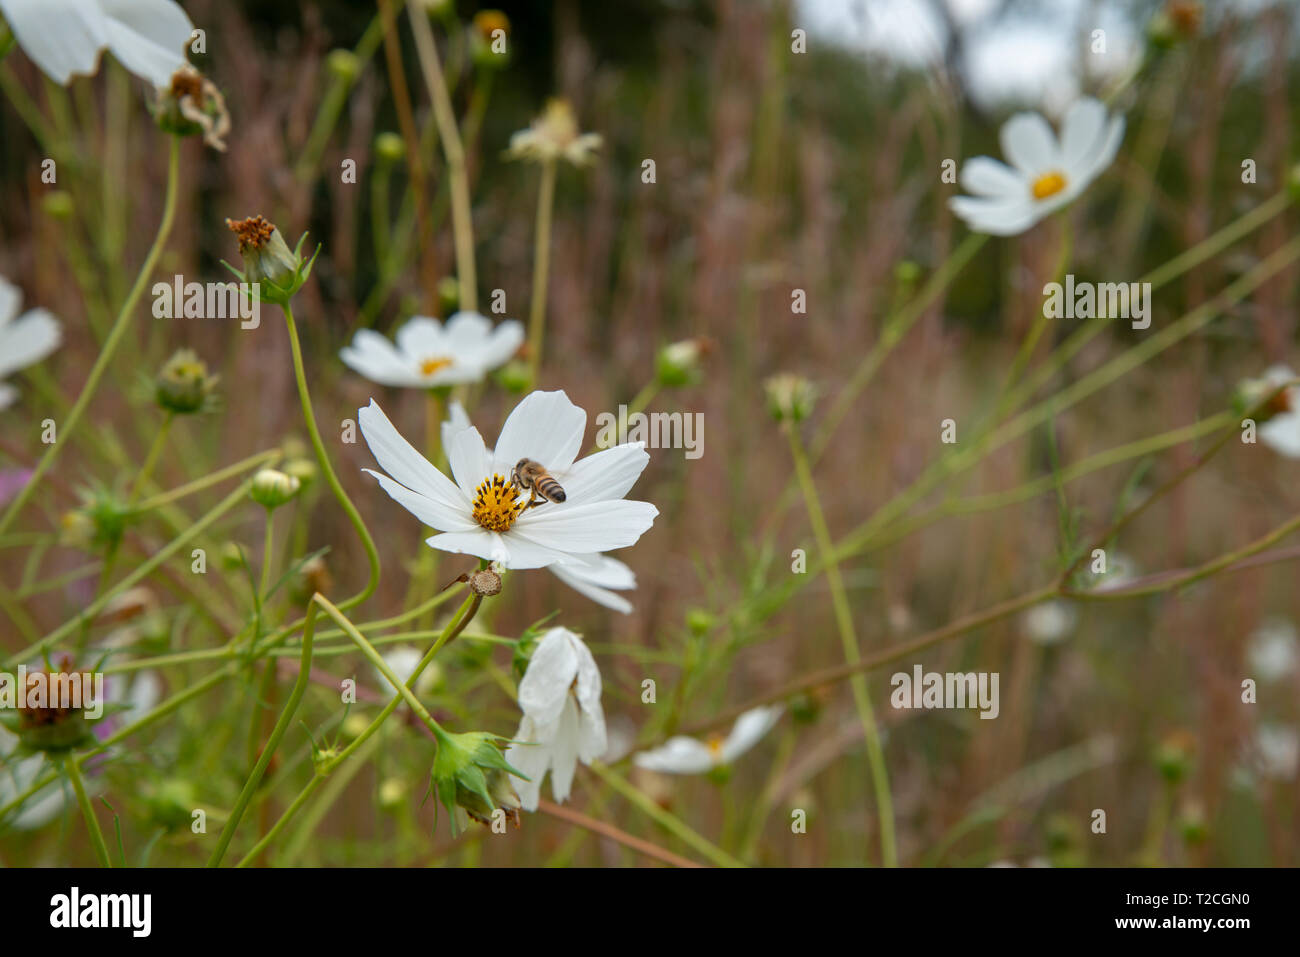 Johannesburg, South Africa, 1st April, 2019. A bee feasts on a Cosmos flower as rain clouds roll in over a Cosmos field in Delta Park. Cosmos bloom here in March, as autumn starts, as well as in November. Credit: Eva-Lotta Jansson/Alamy News Stock Photo